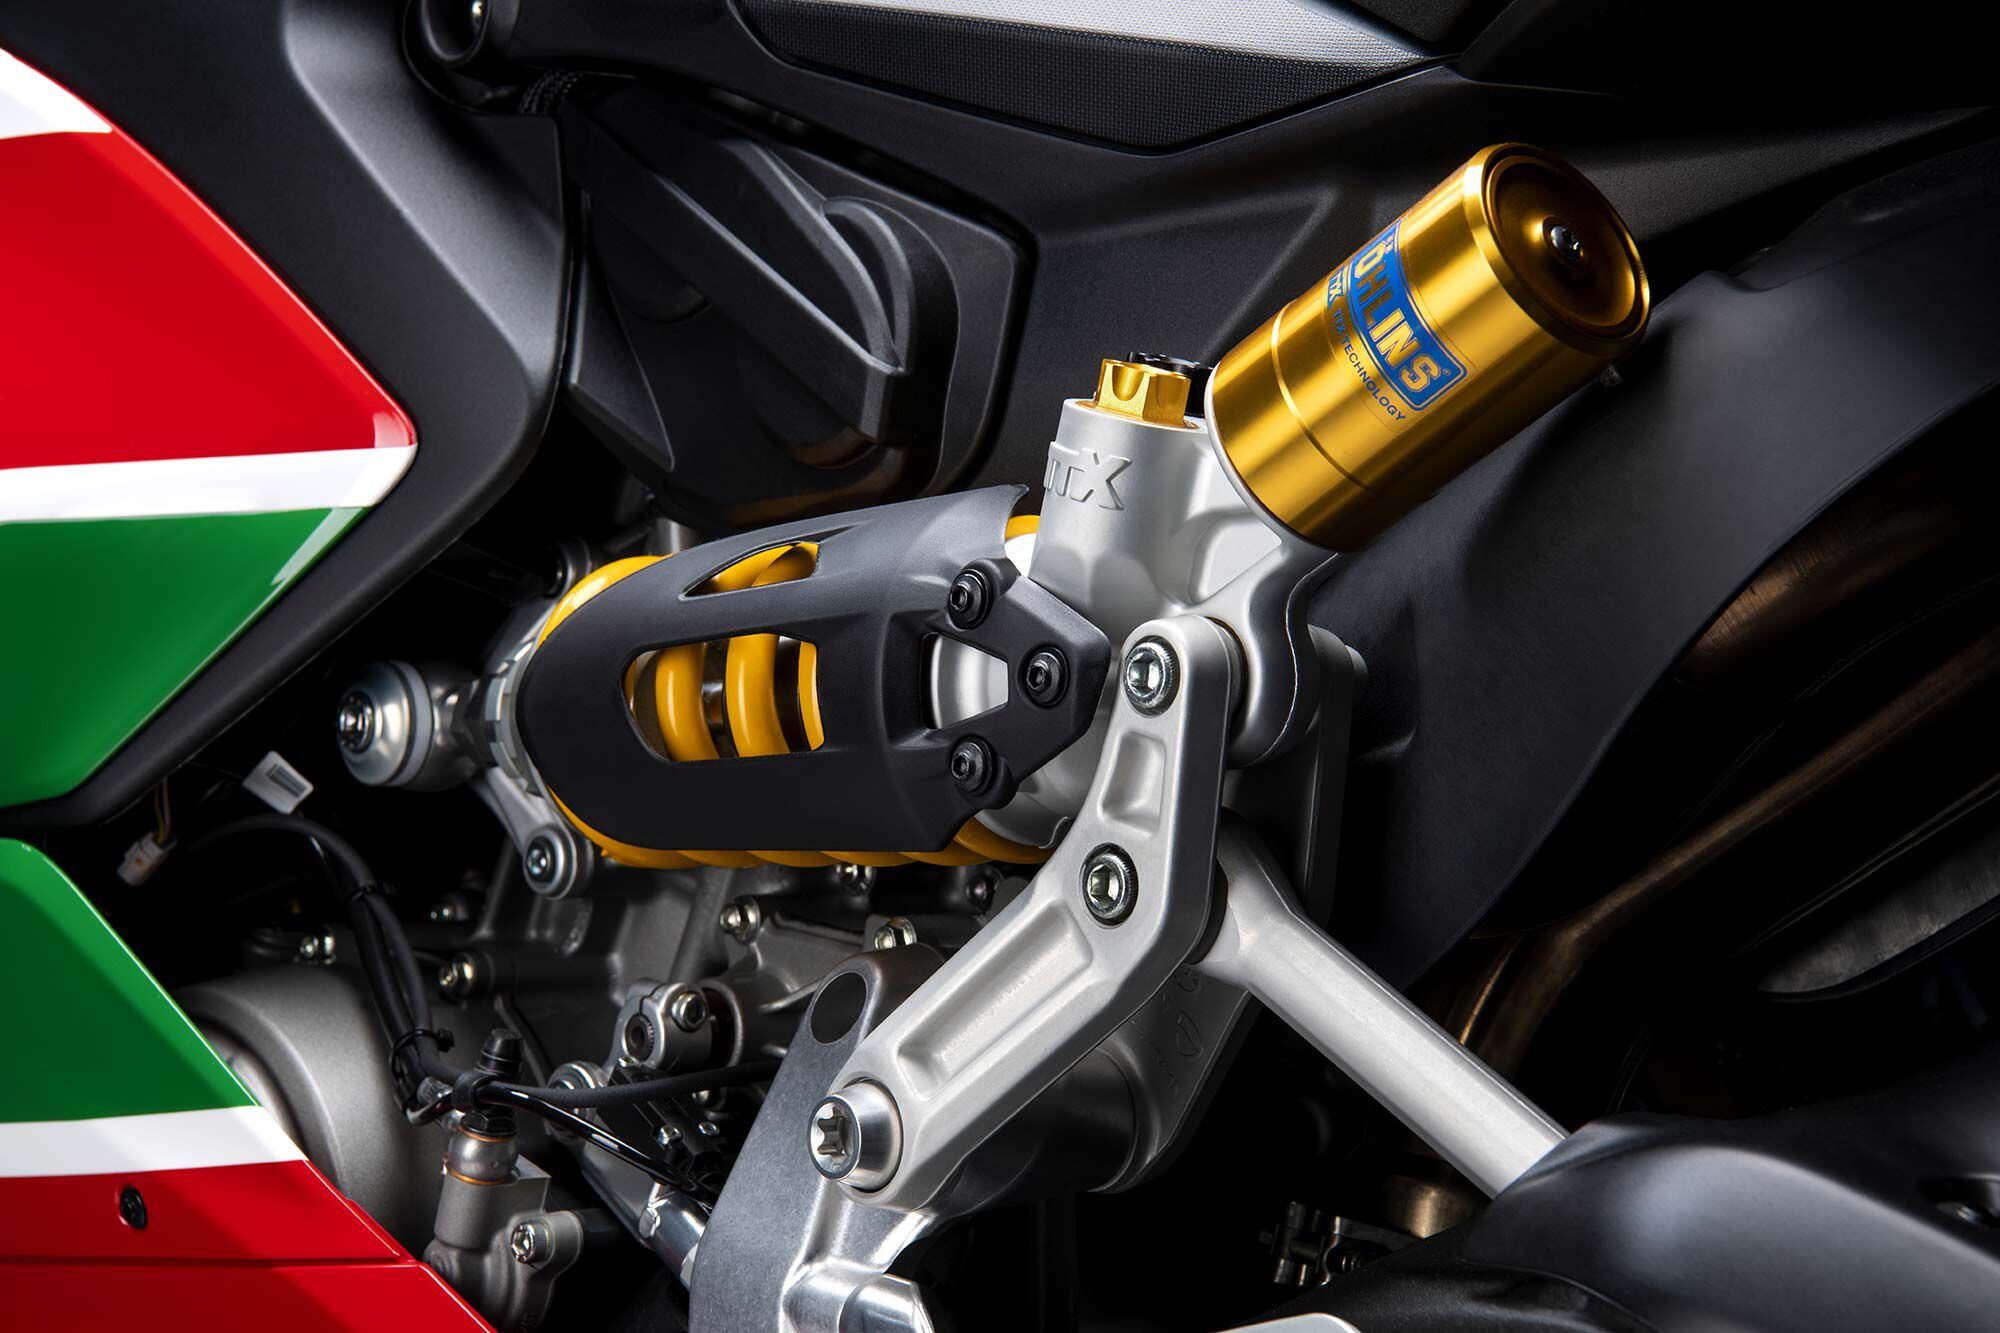 The Panigale V2 Bayliss gets upgraded suspension components, compared to the standard V2. Out back, there’s a fully adjustable Öhlins TTX 36 shock that offers great performance for track riding.